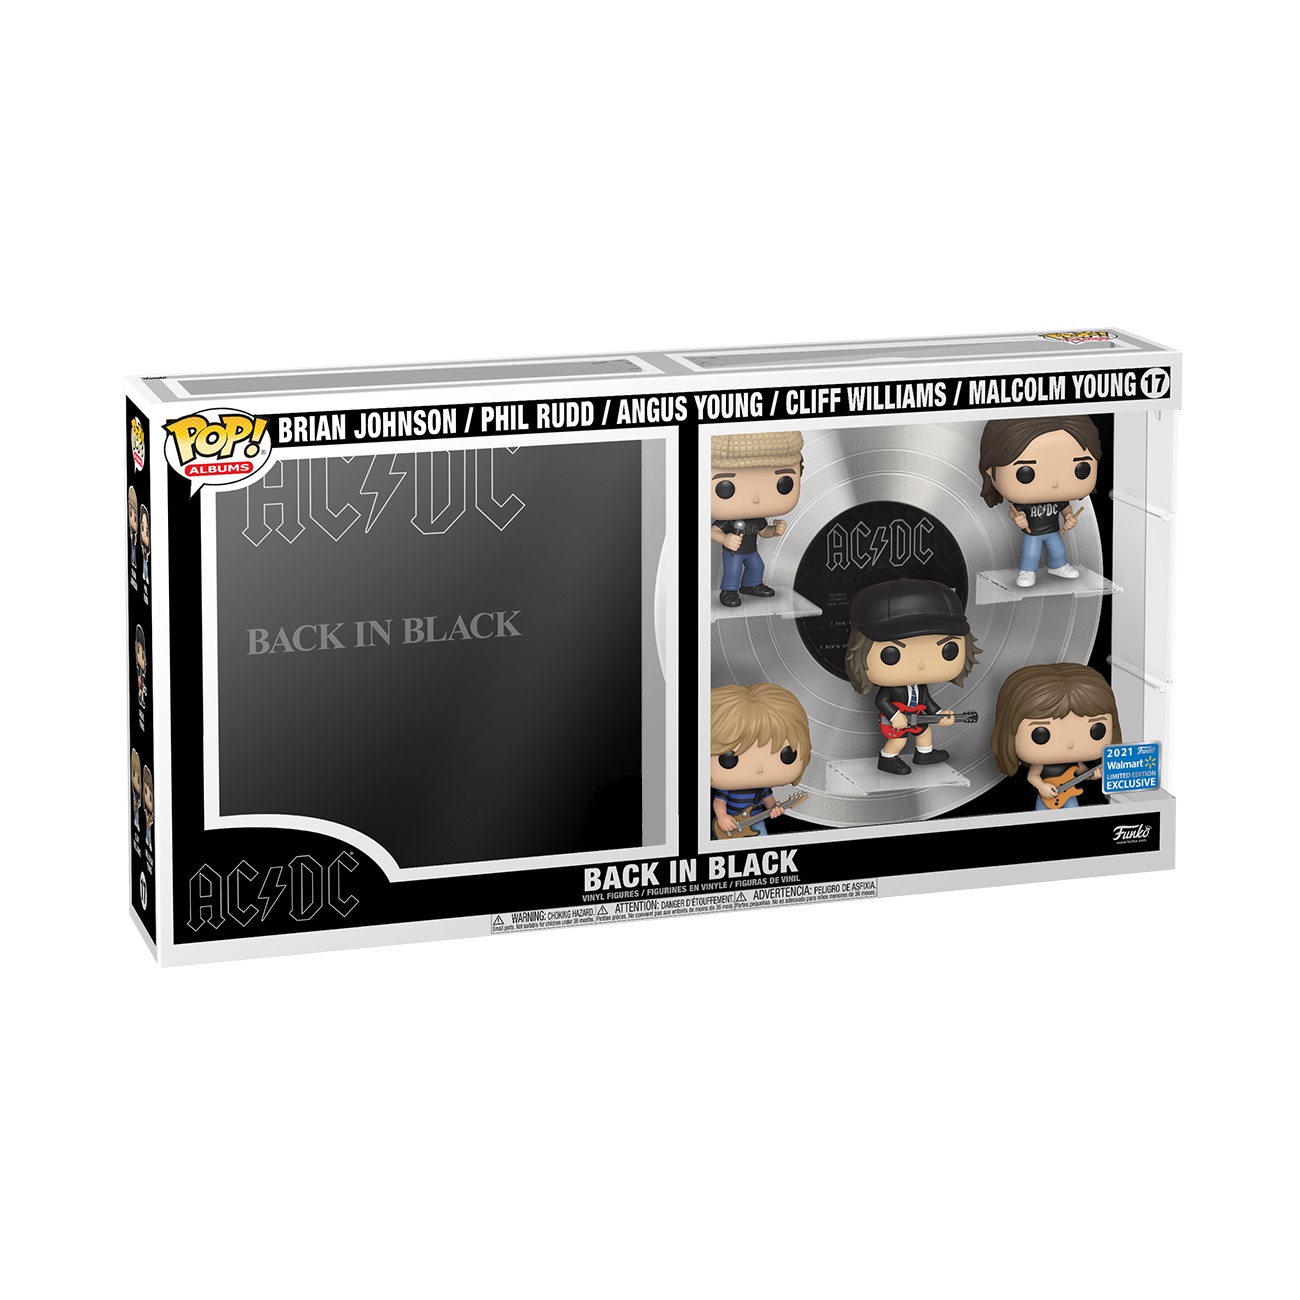 Funko Pop! Deluxe Album: ACDC - Back in Black - Walmart Exclusive $39.88 Free Shipping